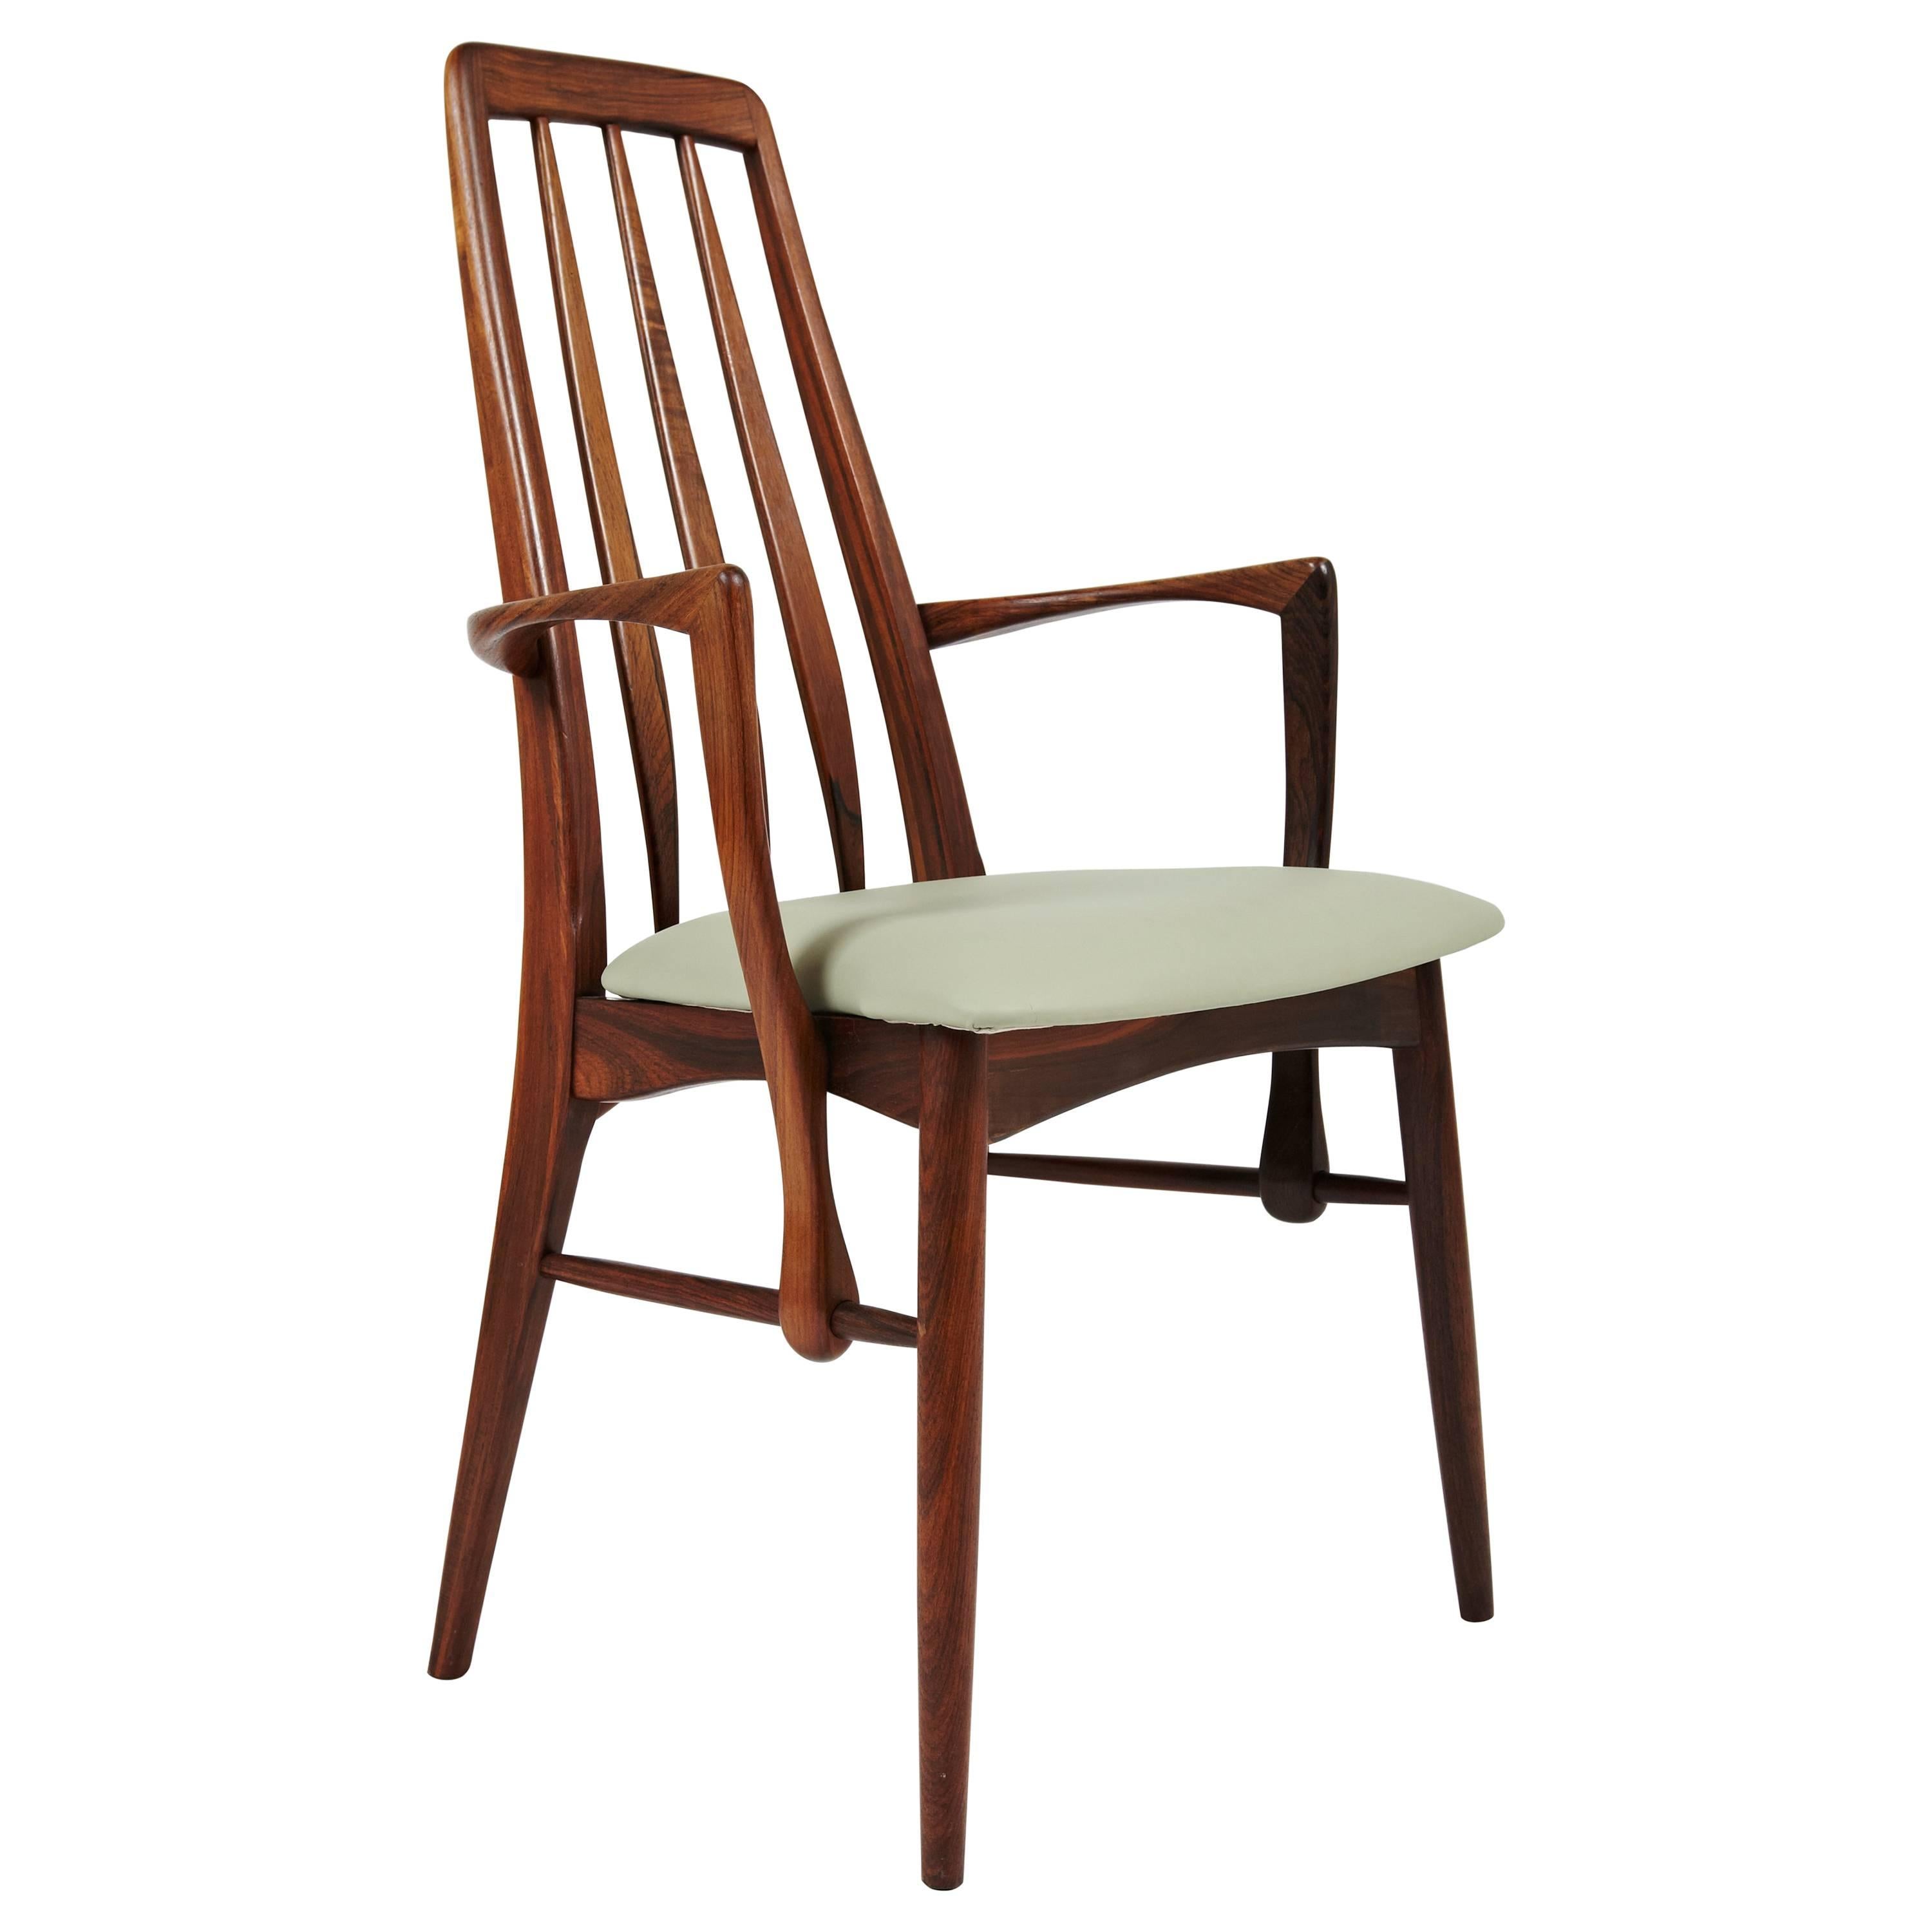 Niels Kofoed Rosewood Dining Chair with Arms, circa 1964 For Sale